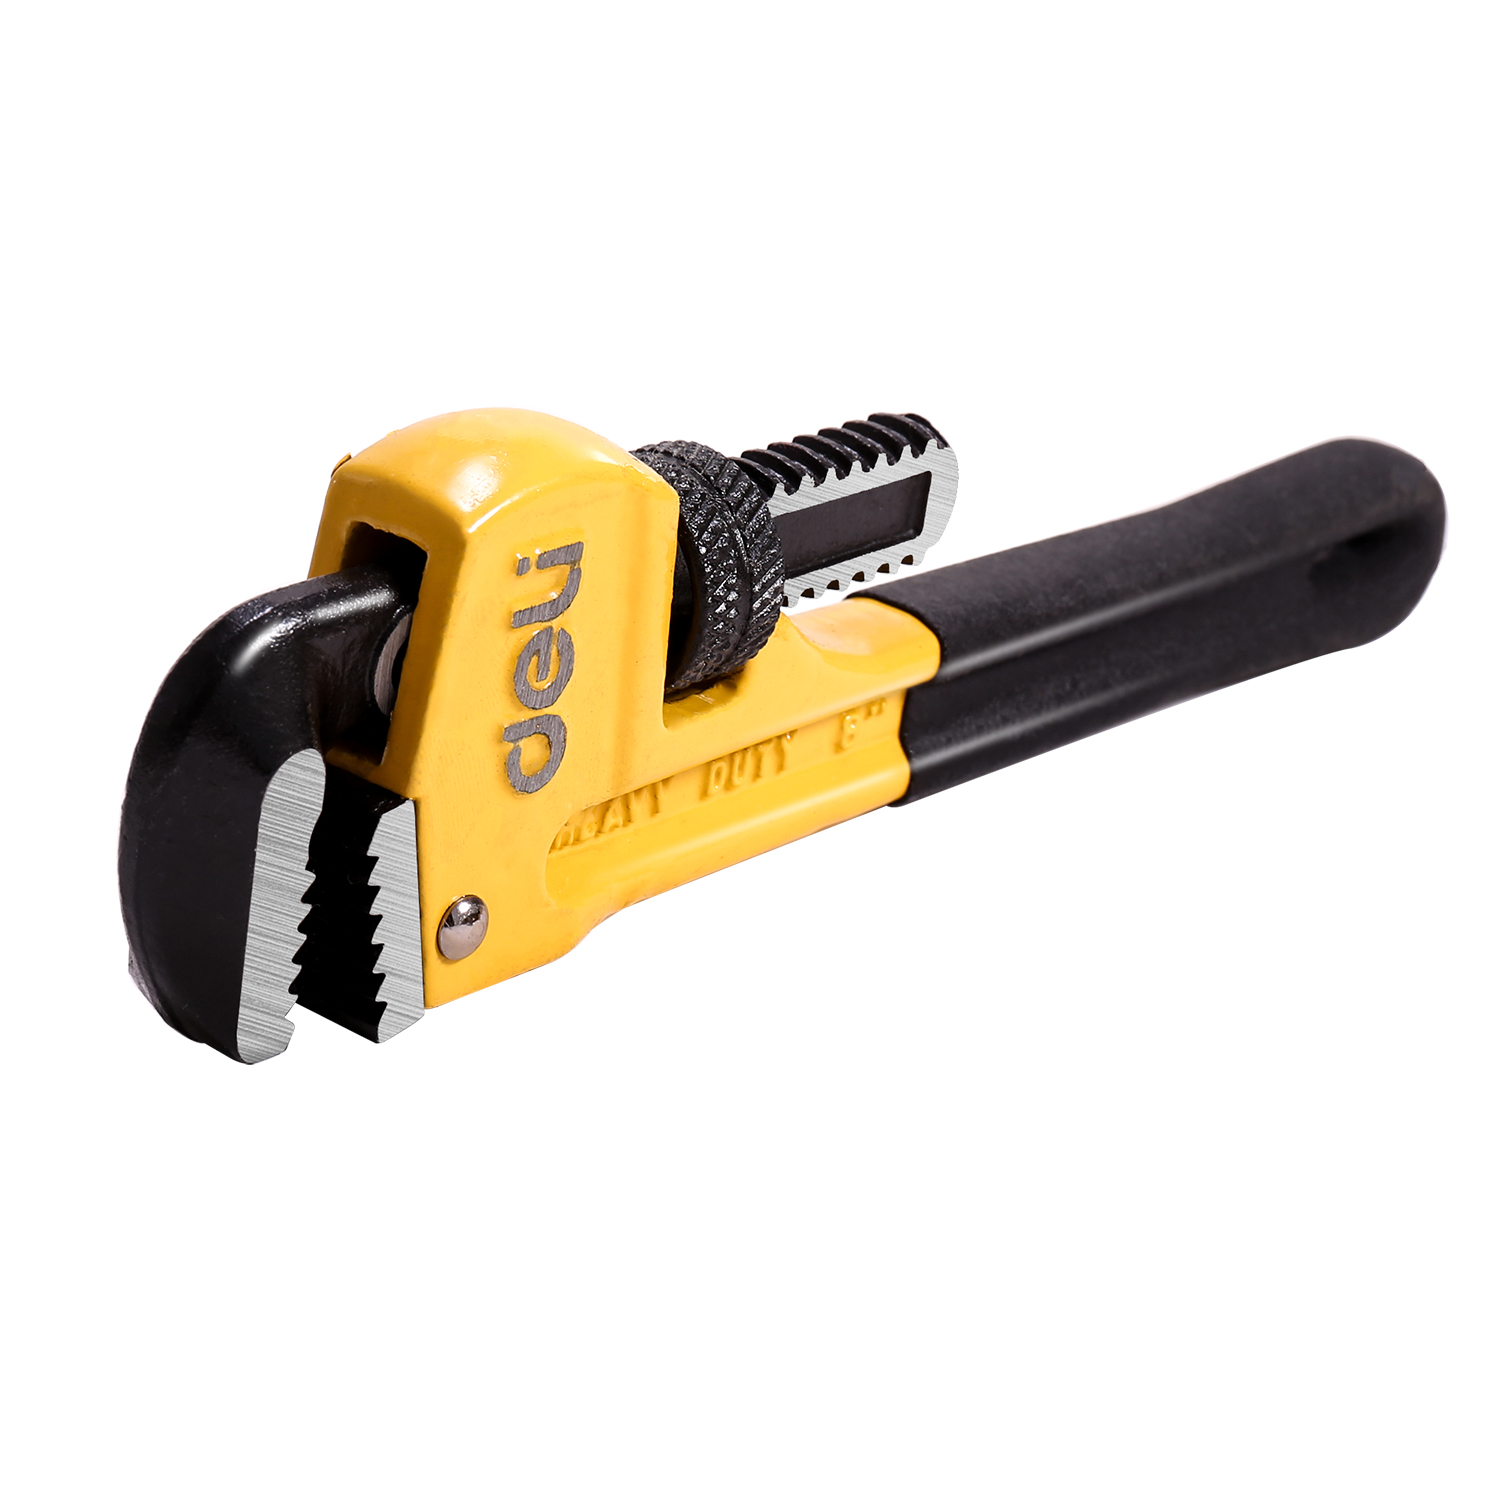 aluminum Pipe Wrench with smooth jaws for tight spaces